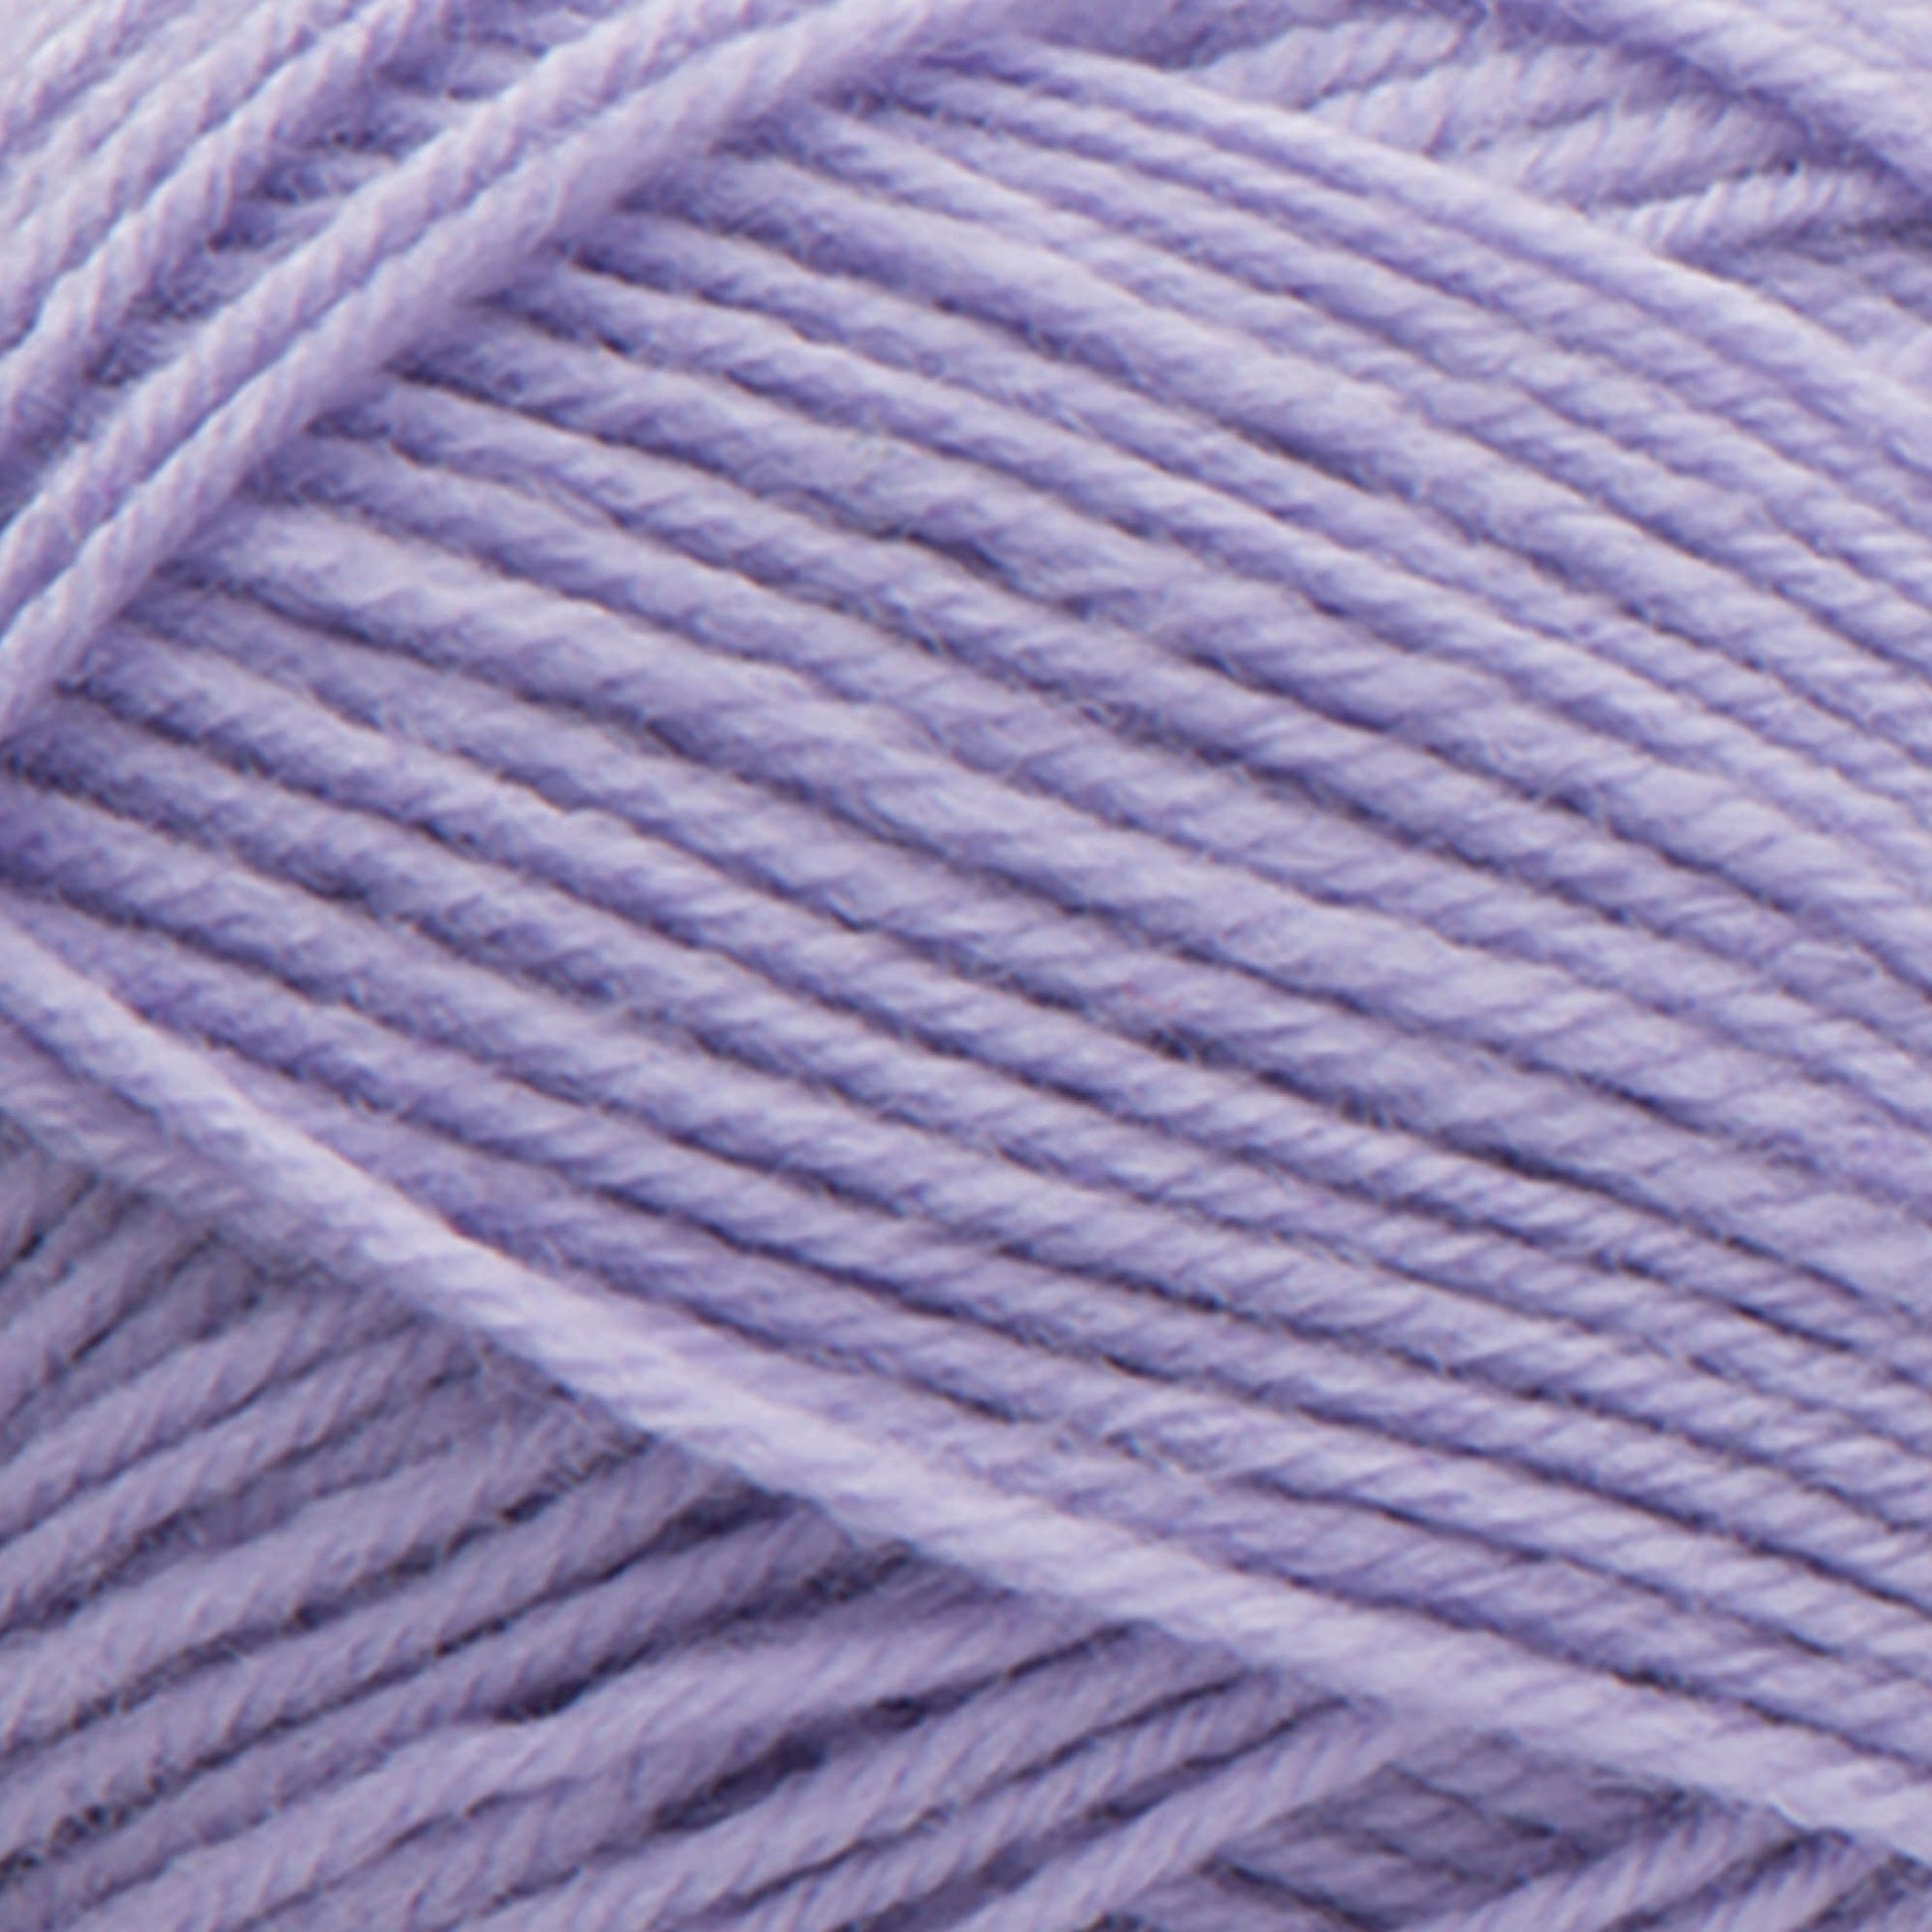 Caron Kindness Yarn - Discontinued Shades Orchid